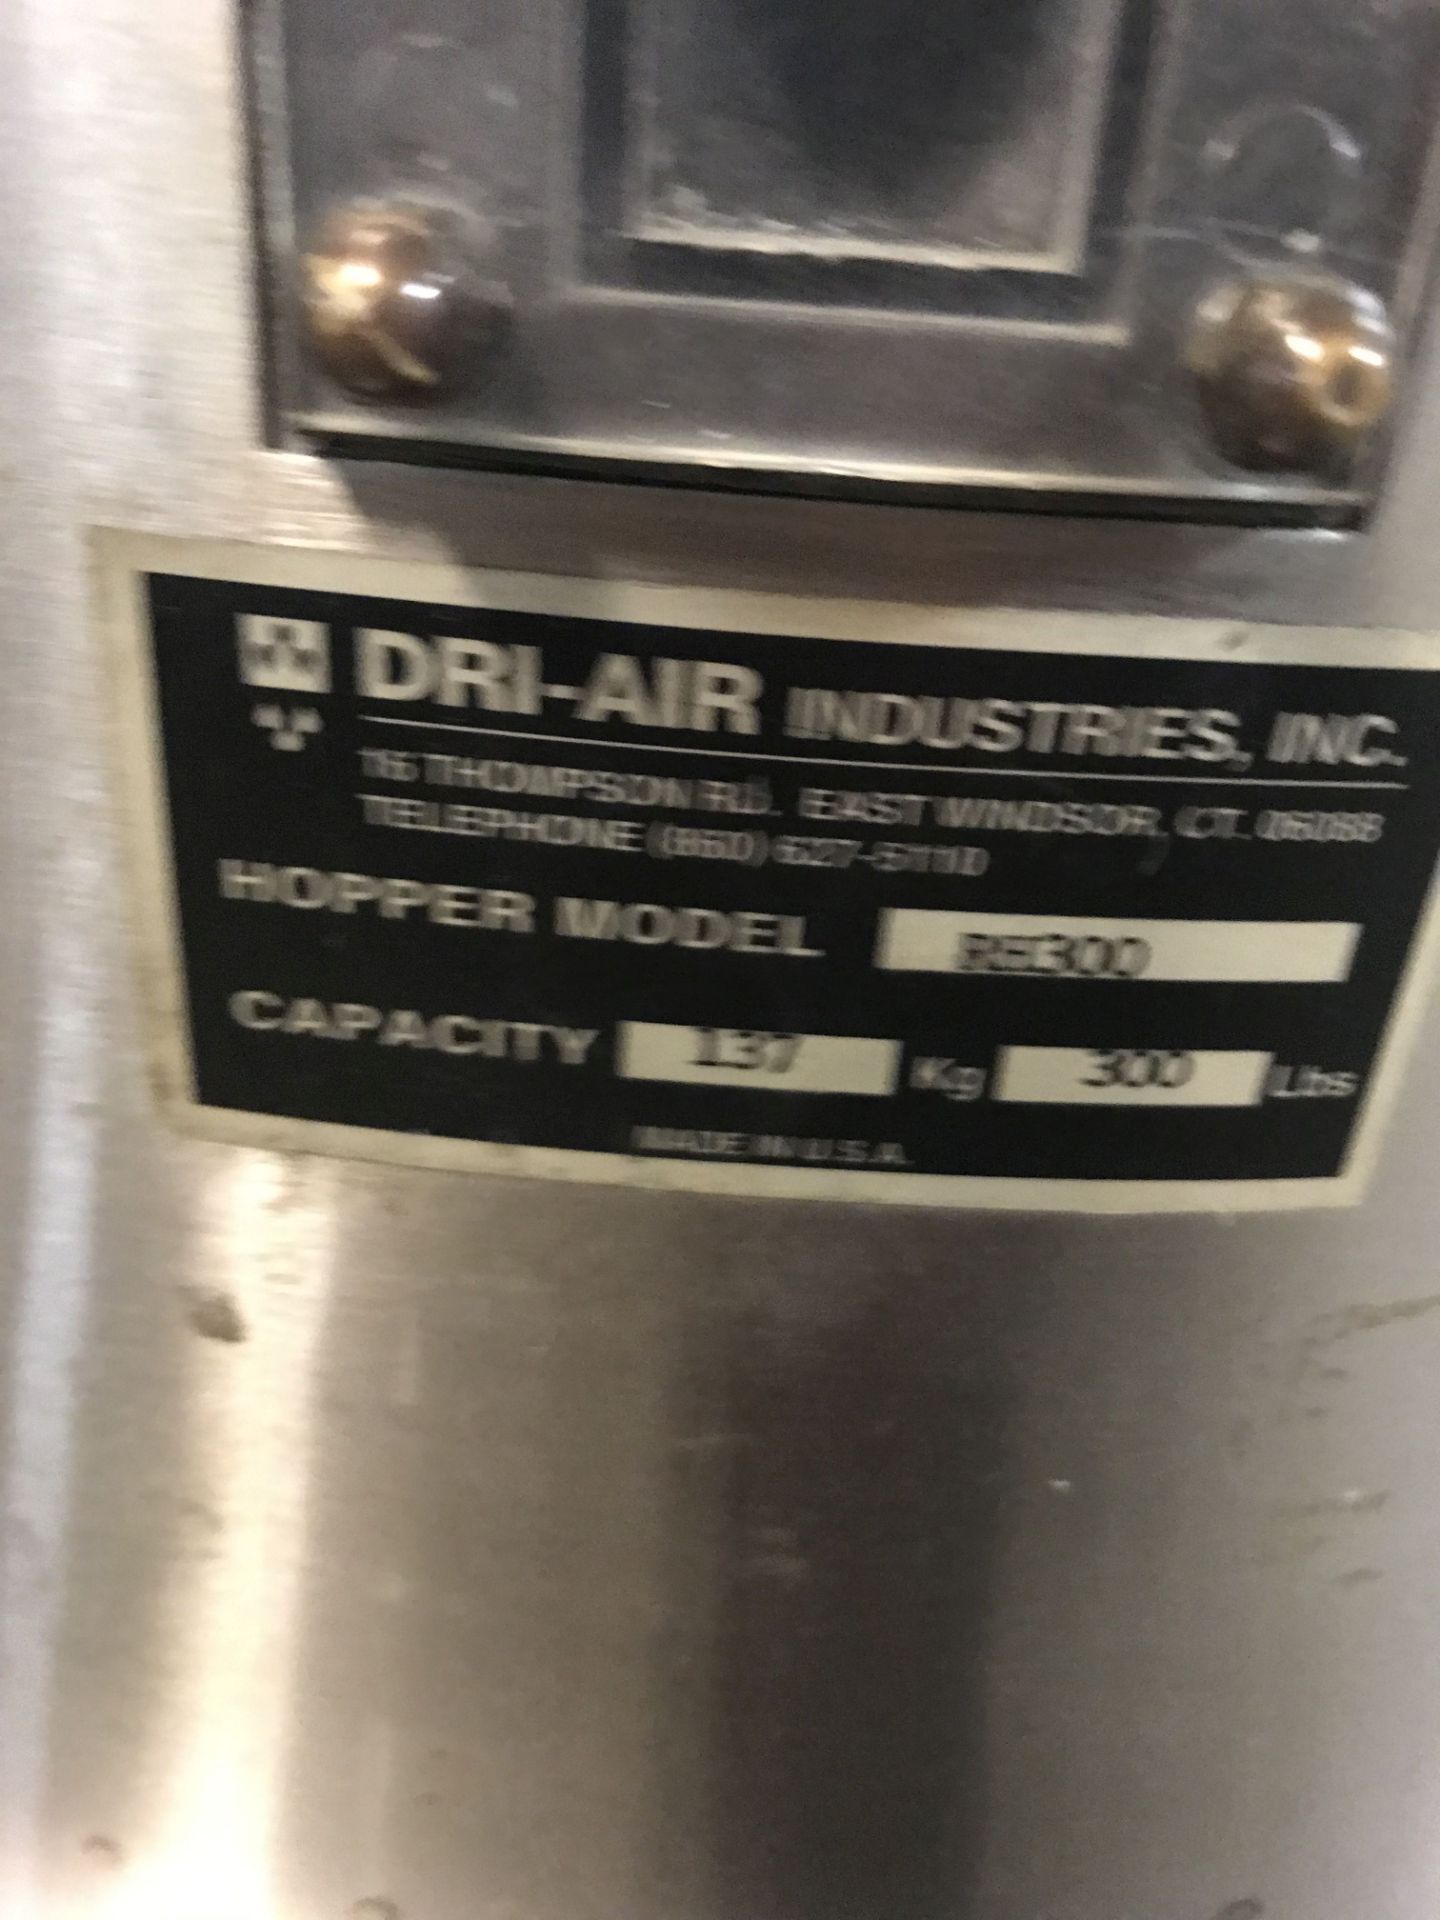 DRI-AIR DRYER, MODEL APD-8, PROCESS RATE 90LBS/HOUR, 3/480V, 15 AMP, S/N D14167, INCLUDES RB300 - Image 6 of 6